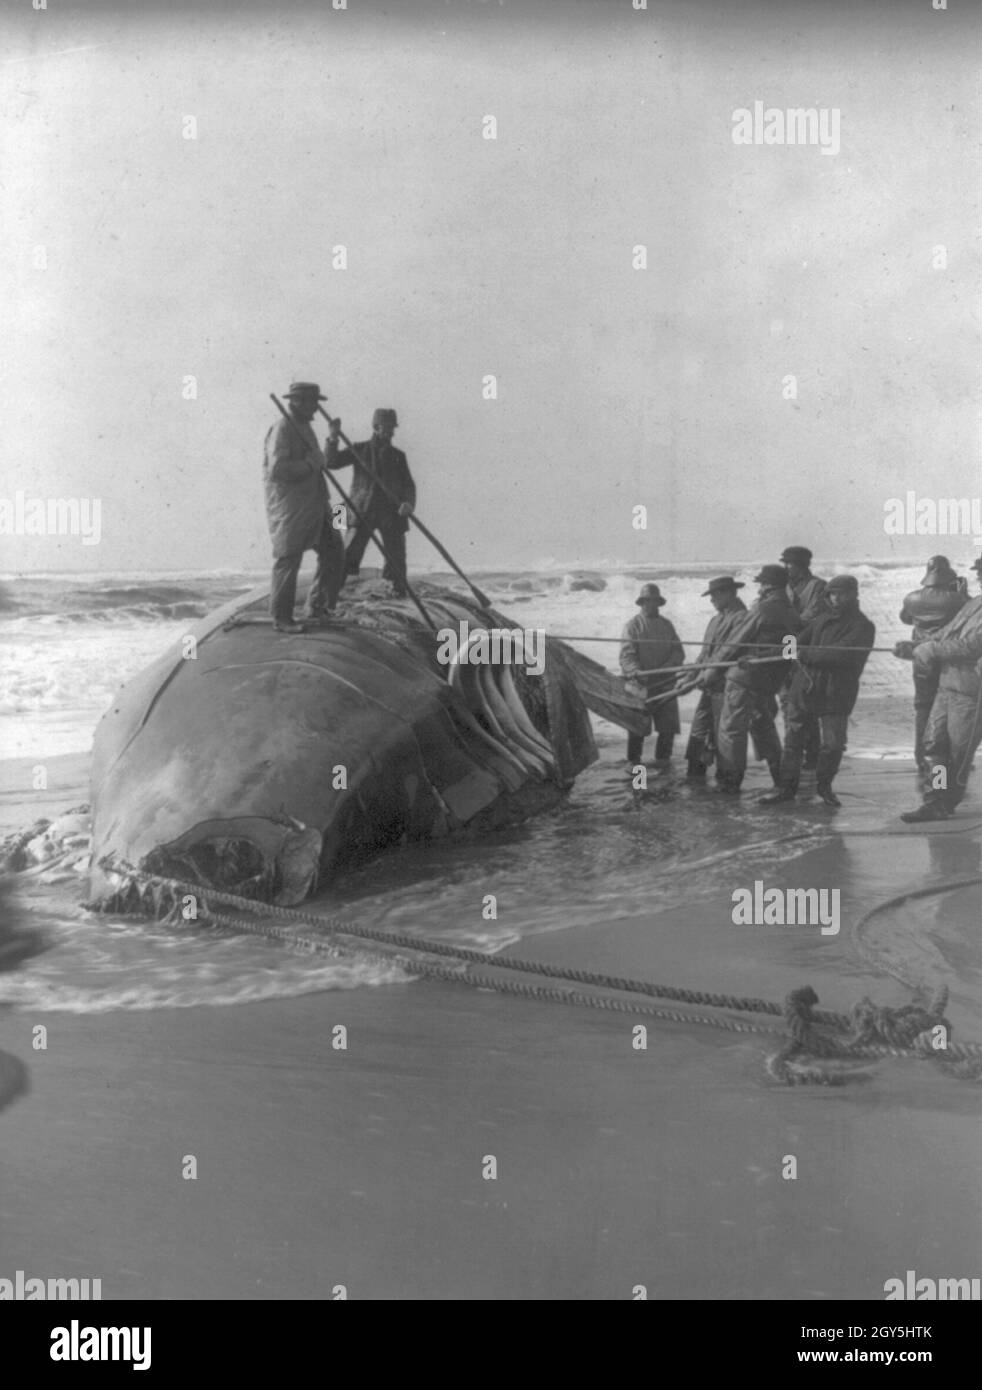 Vintage photo circa 1907 showing whaling men using flensing blades to remove blubber from a whale carcass on a beach Stock Photo